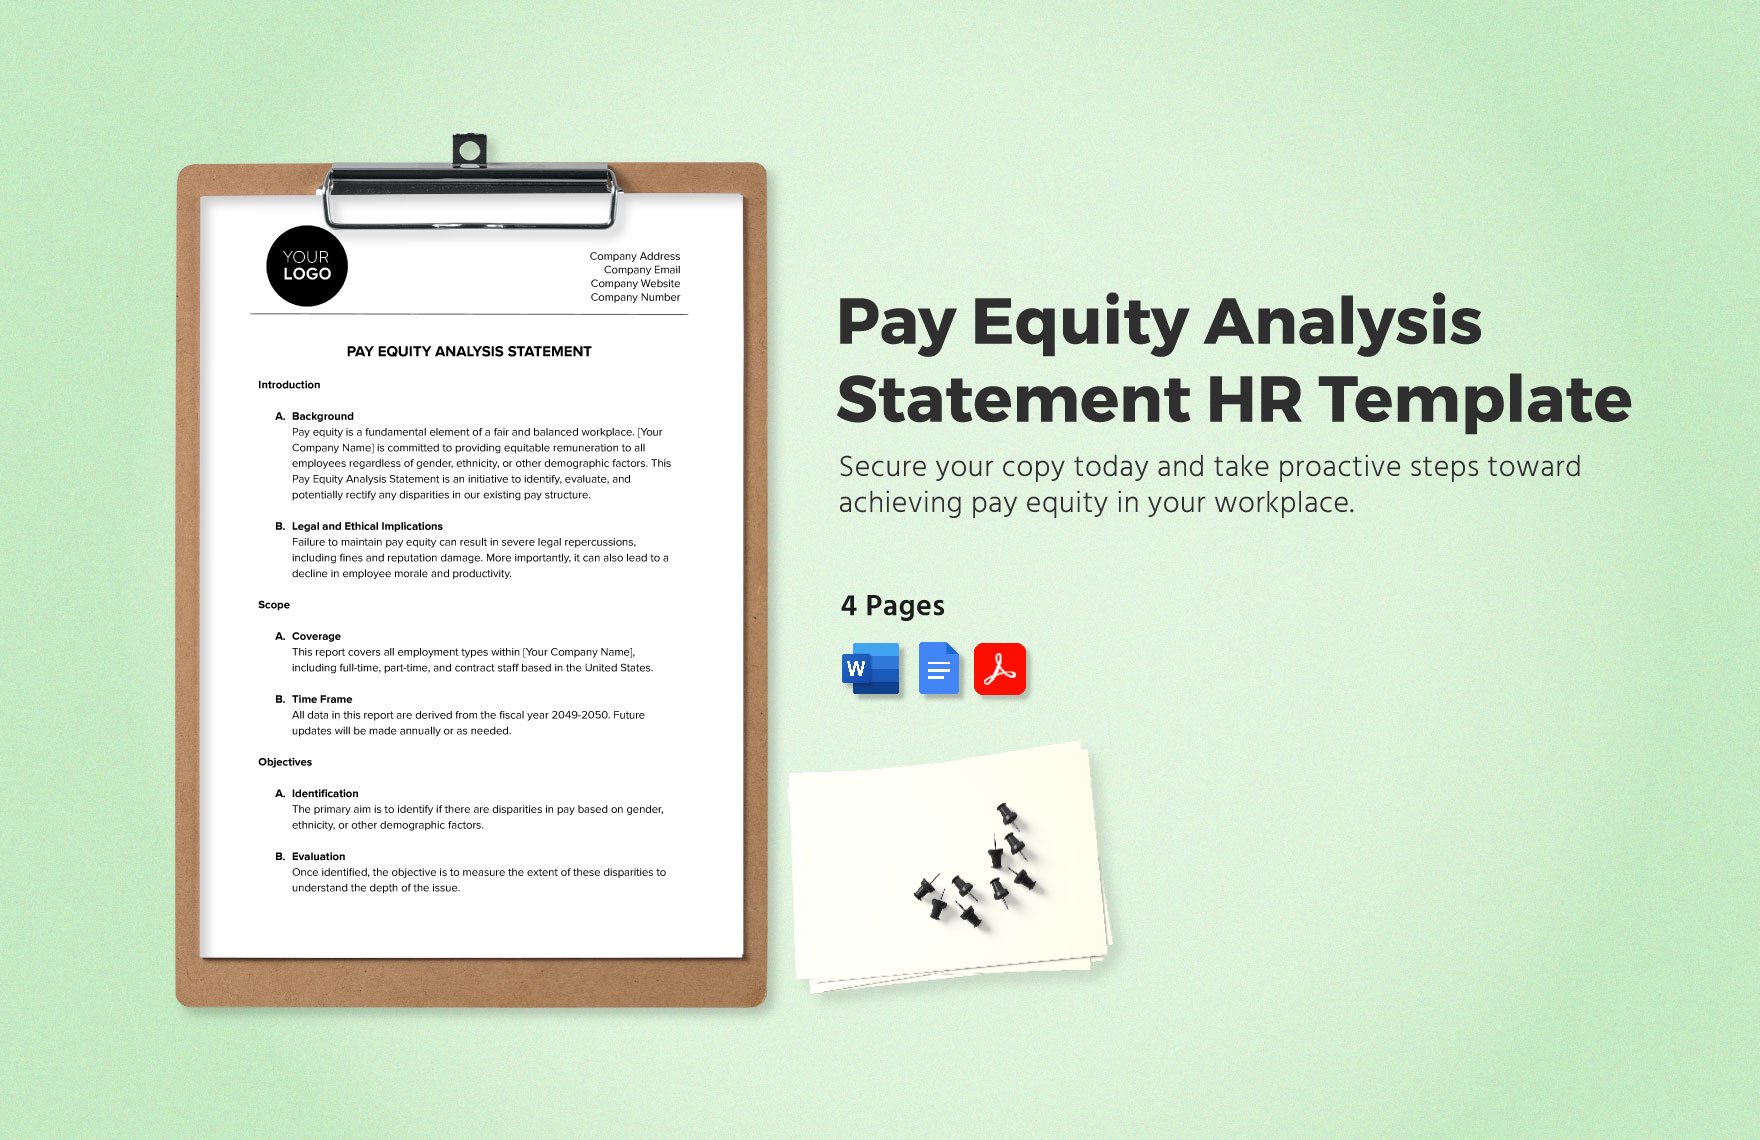 Pay Equity Analysis Statement HR Template in Word, Google Docs, PDF